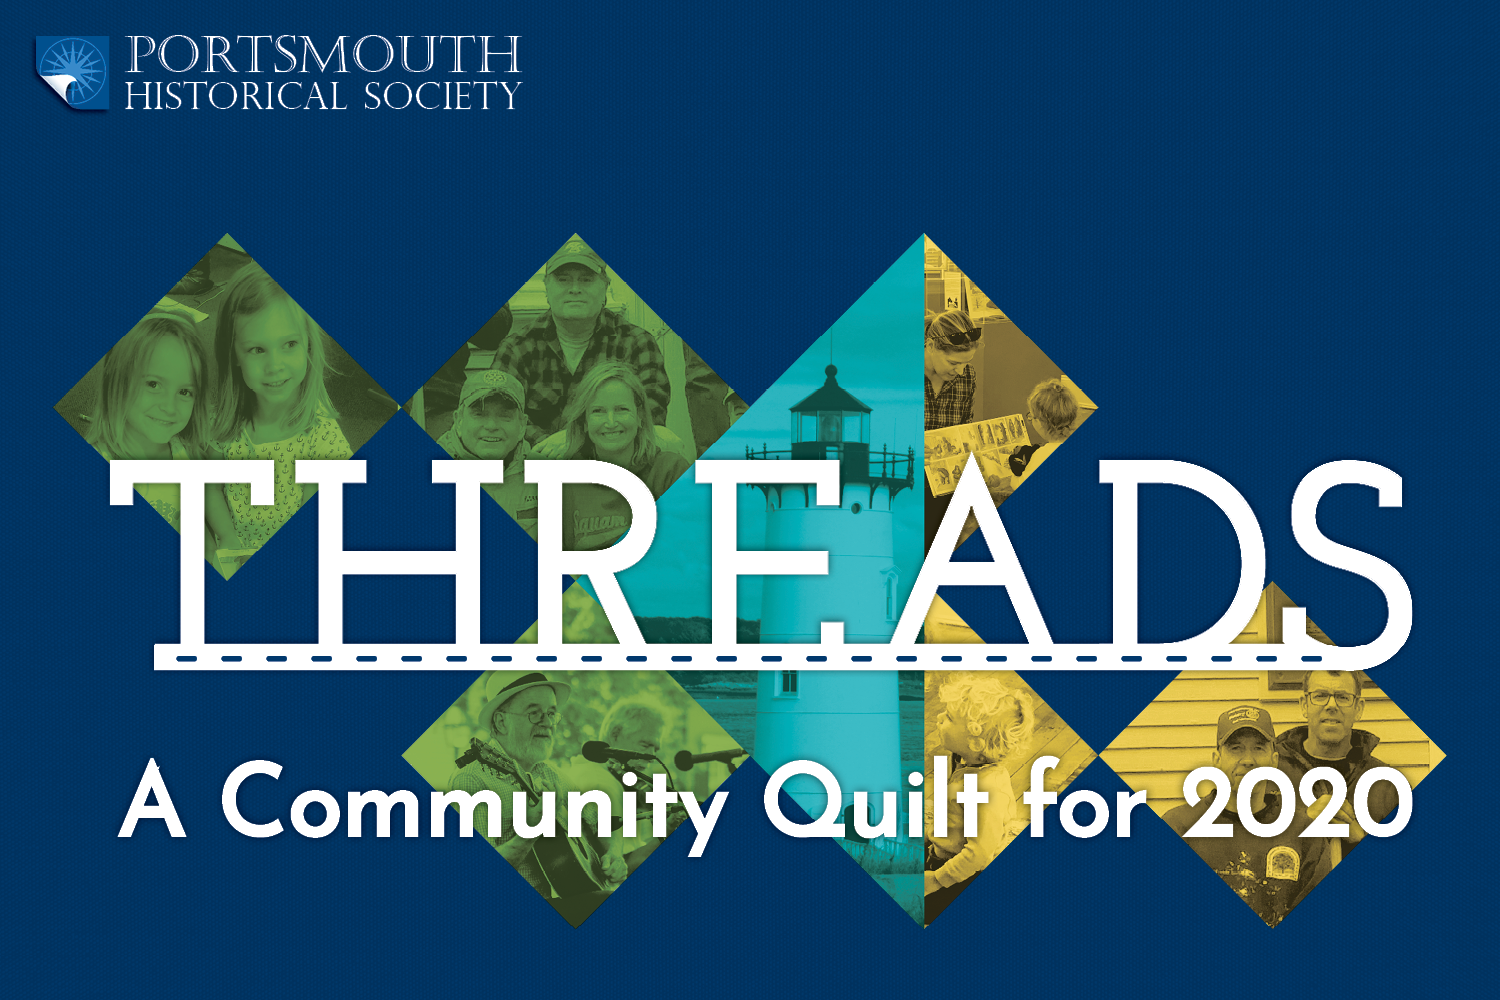 THREADS: A Community Quilt for 2020